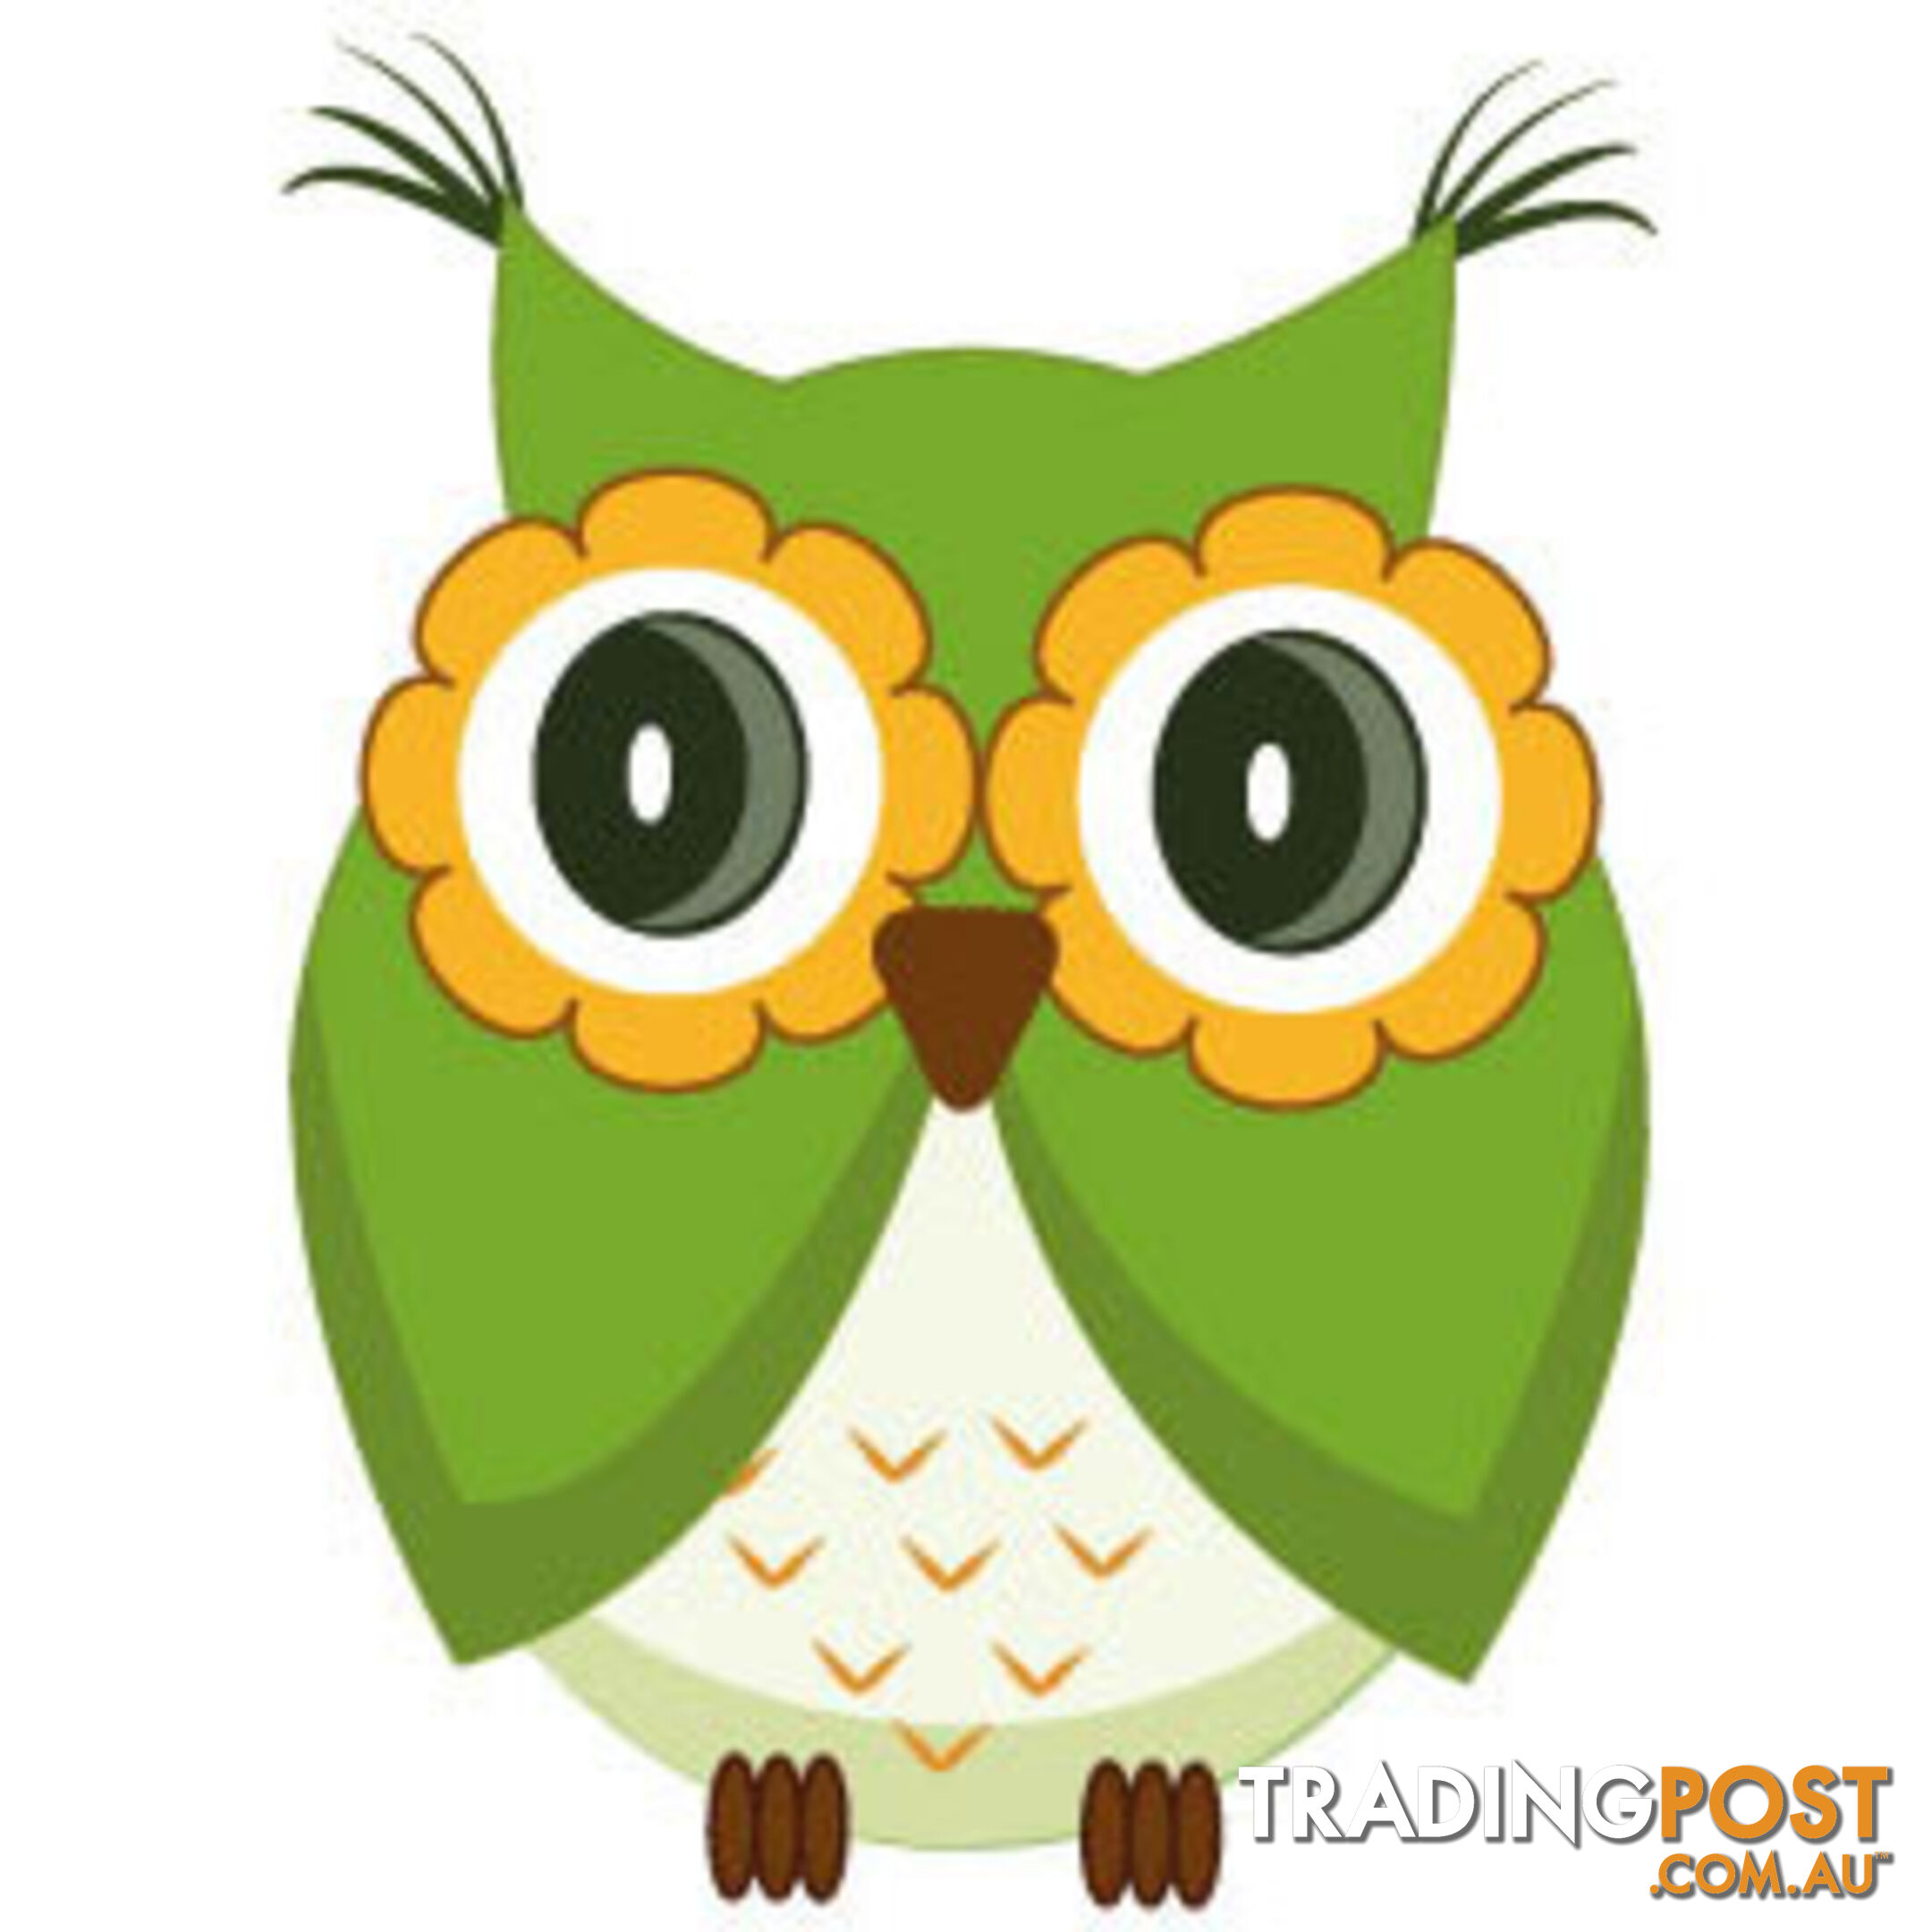 10 X Cute green owl Wall Sticker - Totally Movable